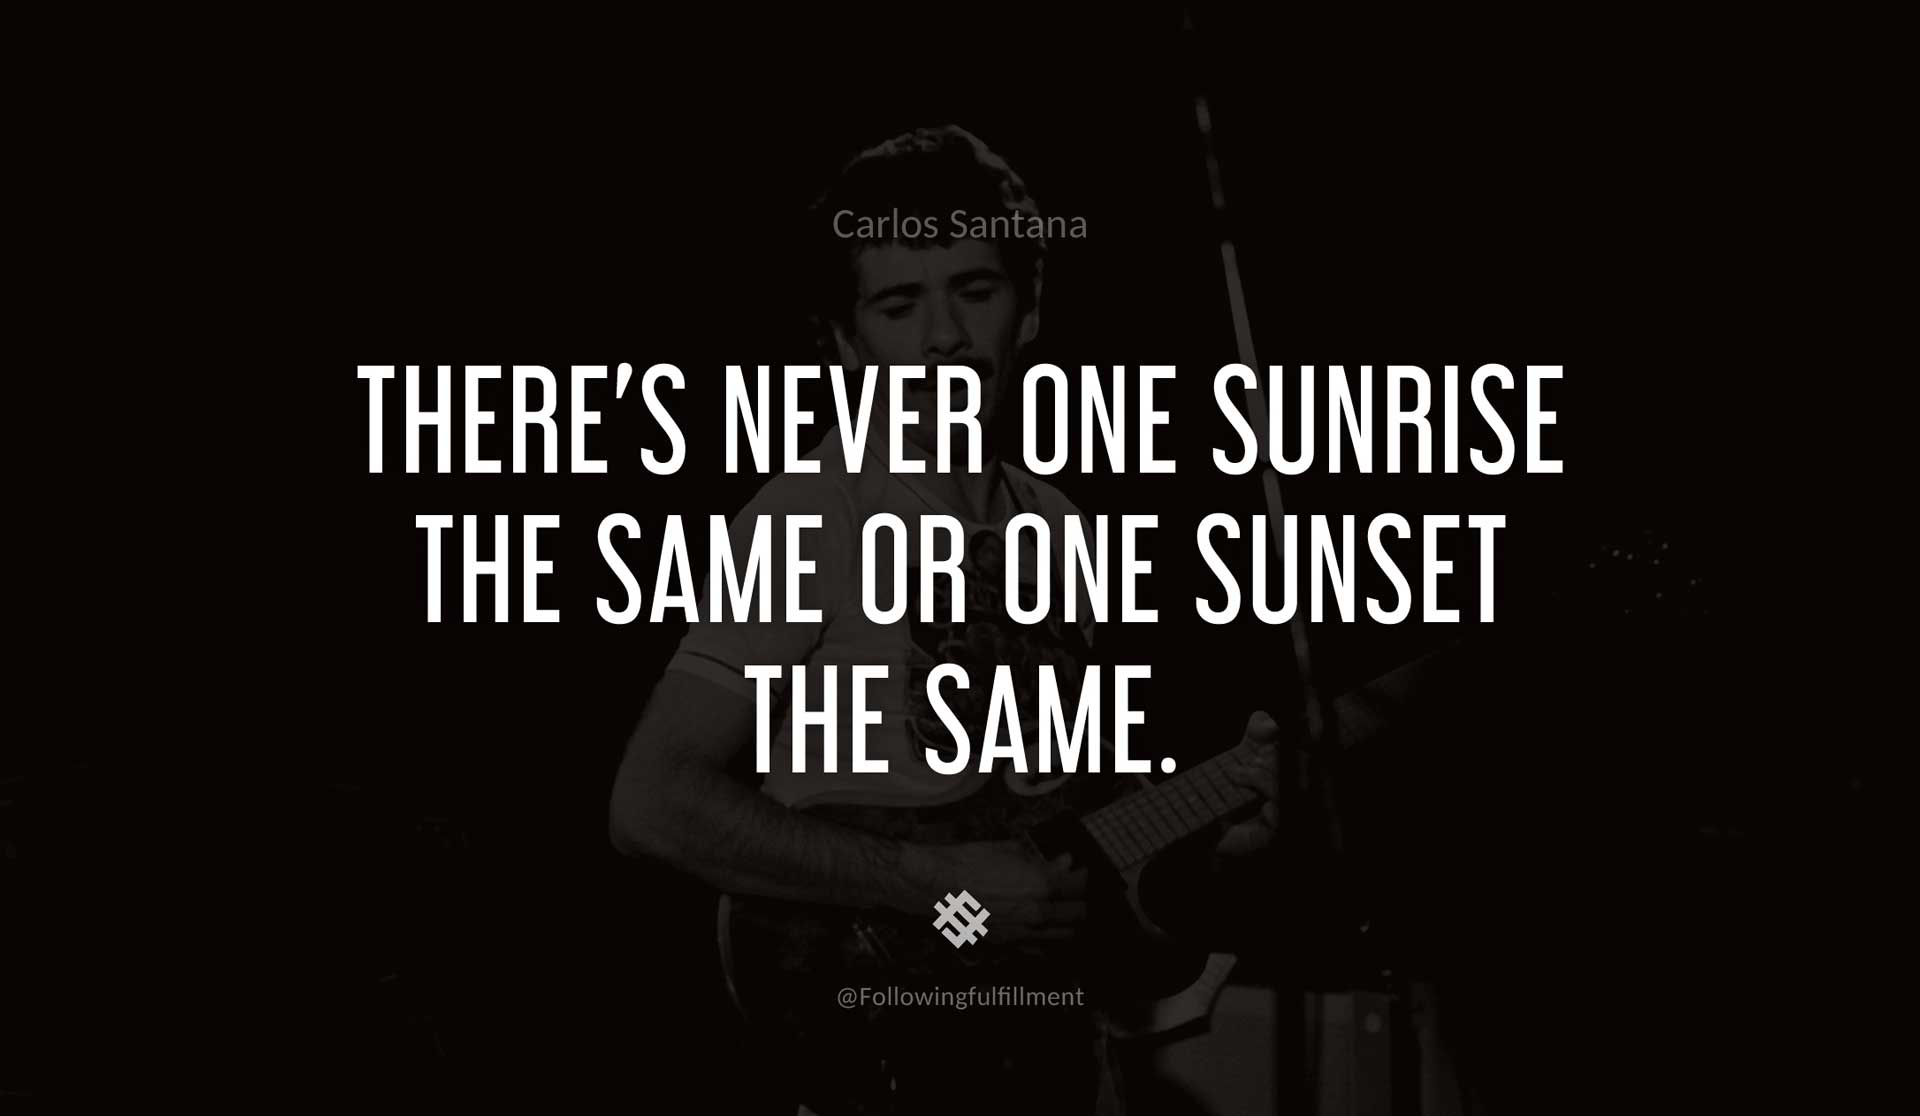 There's-never-one-sunrise-the-same-or-one-sunset-the-same.-CARLOS-SANTANA-Quote.jpg